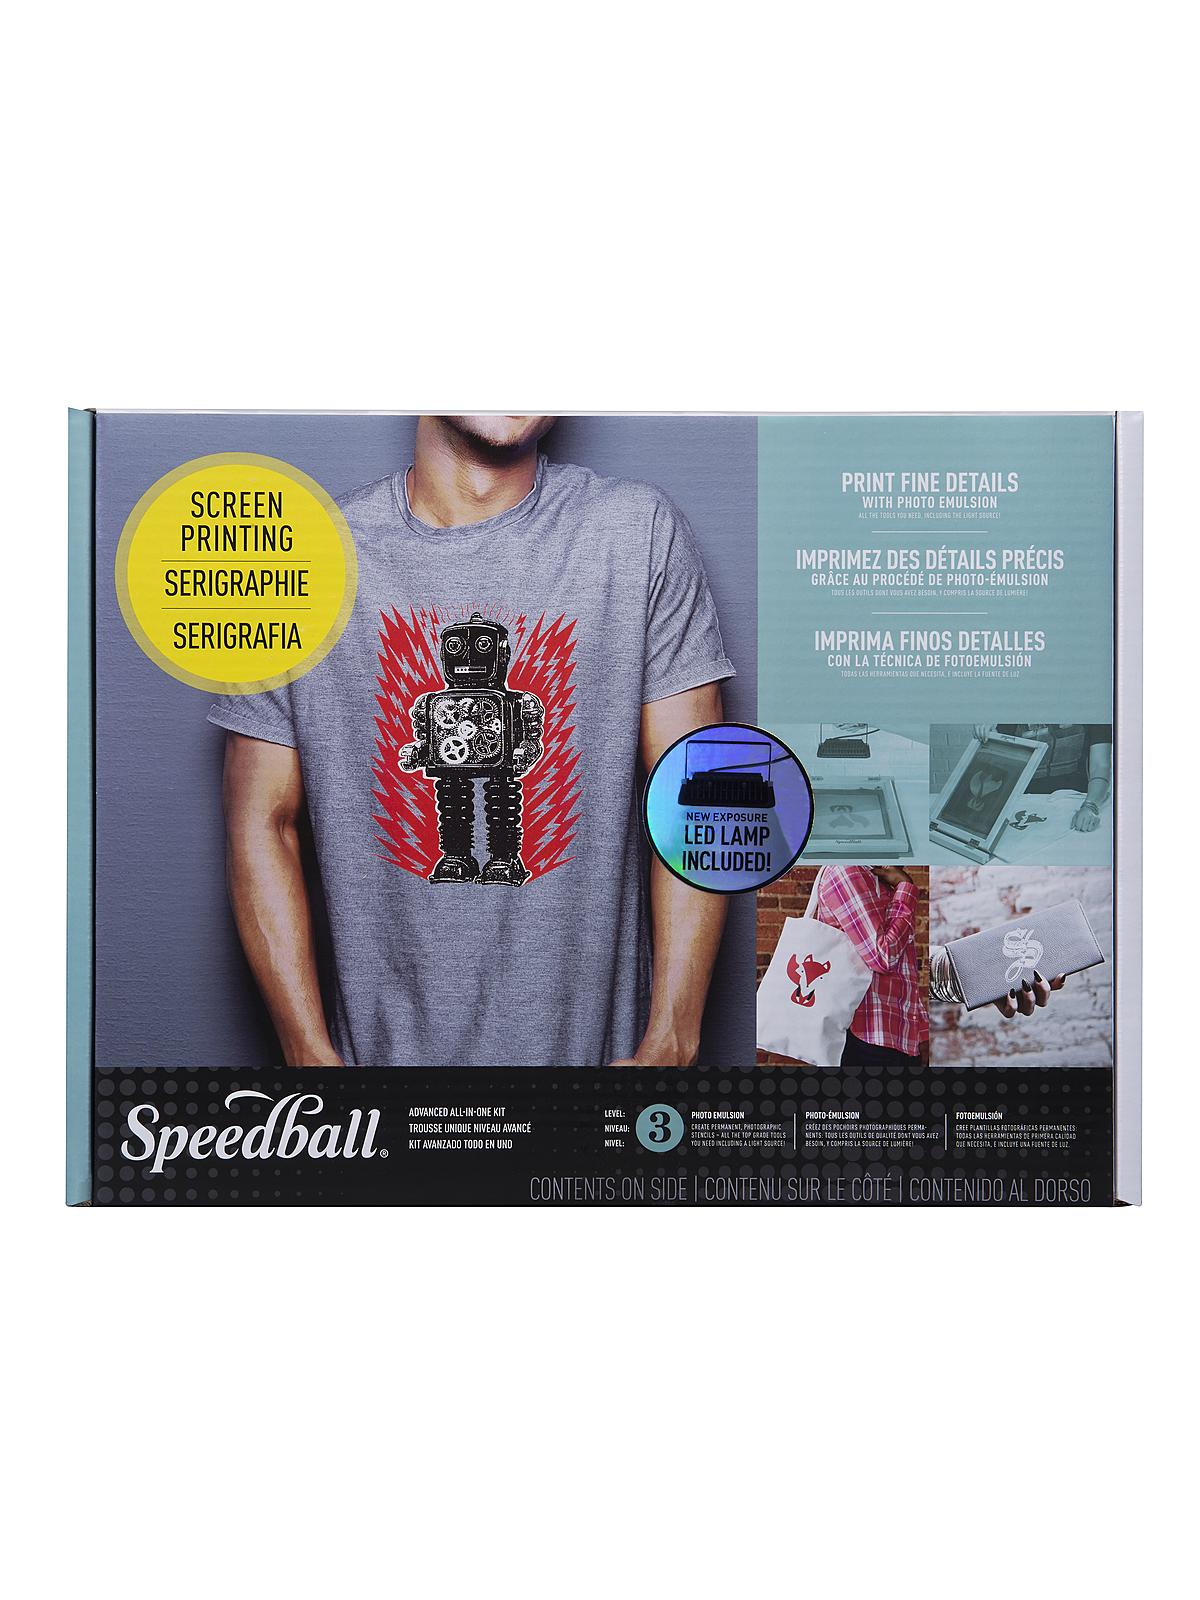 Advanced All-In-One Screen Printing Kit Each